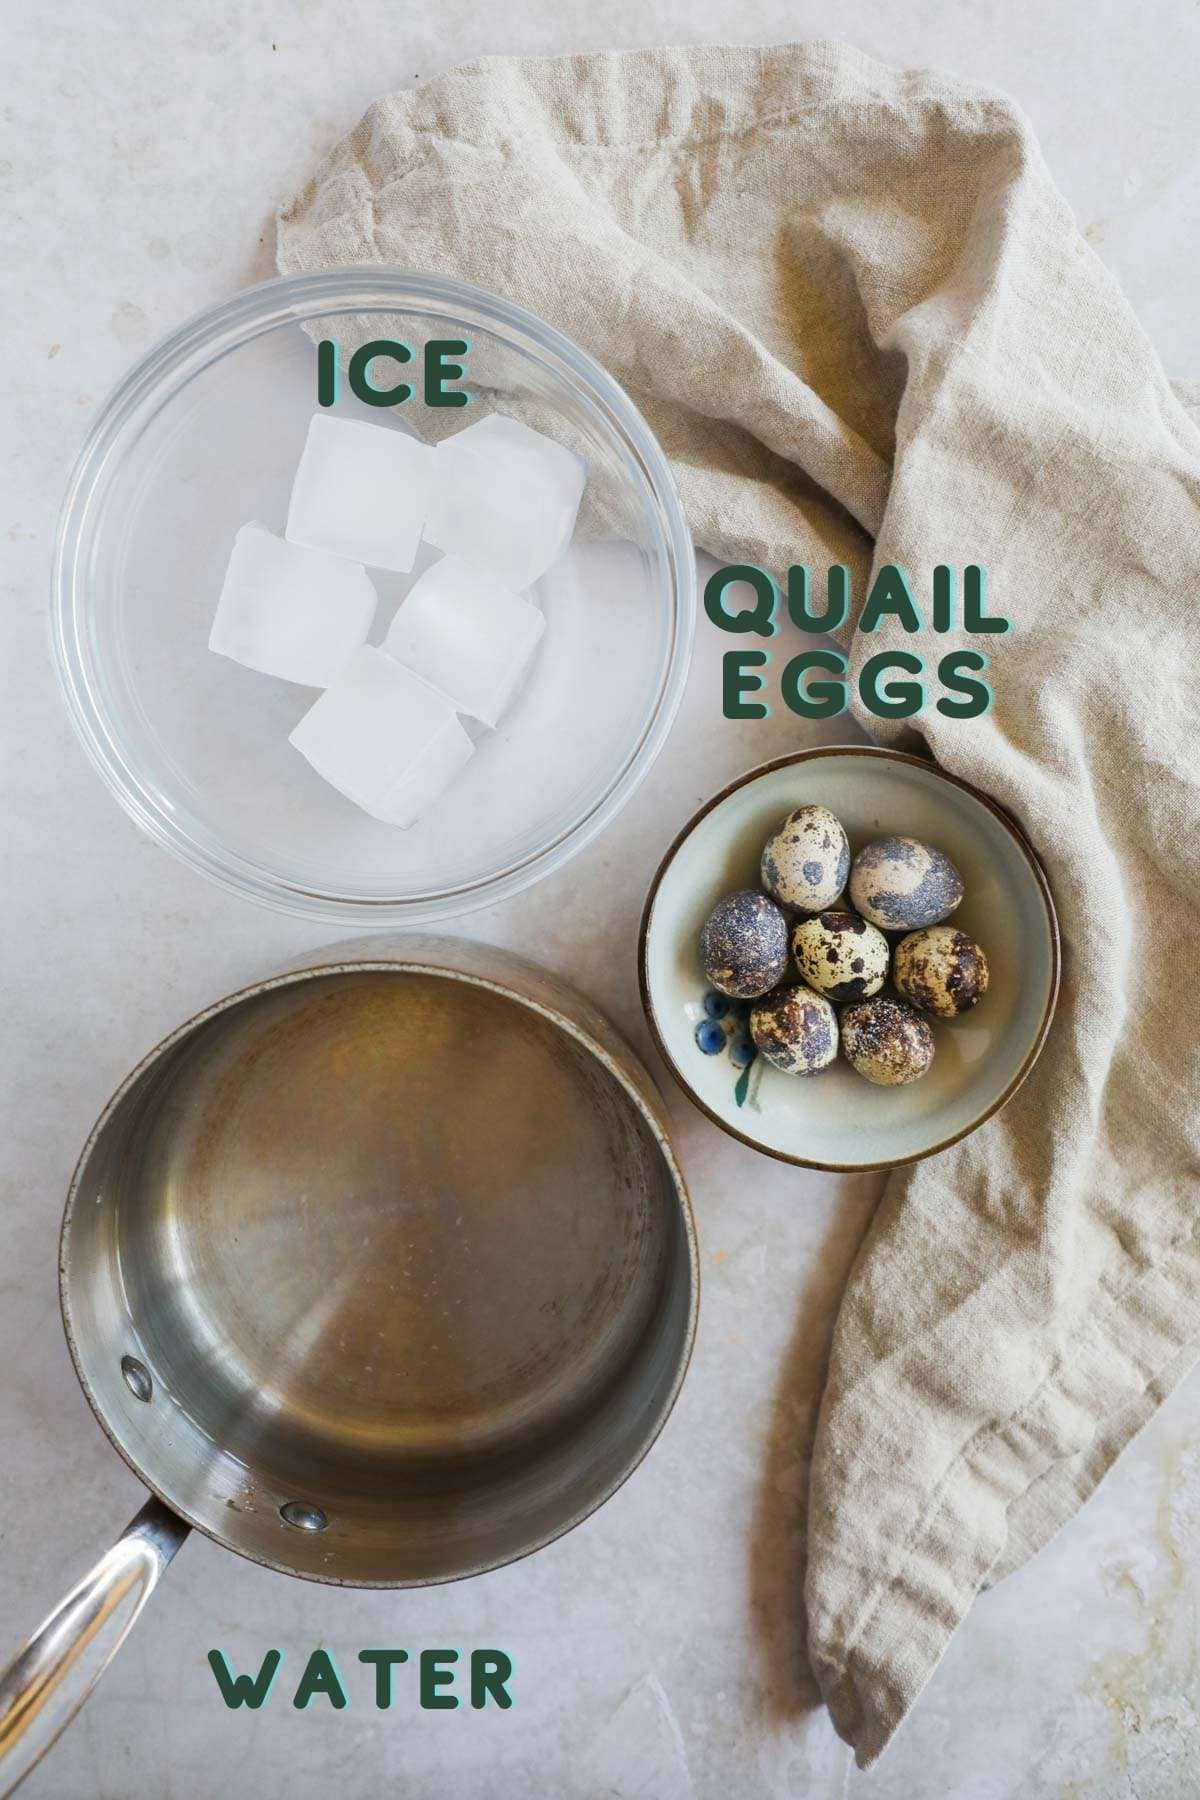 Ingredients to cook quail eggs, including quail eggs, water, and ice.